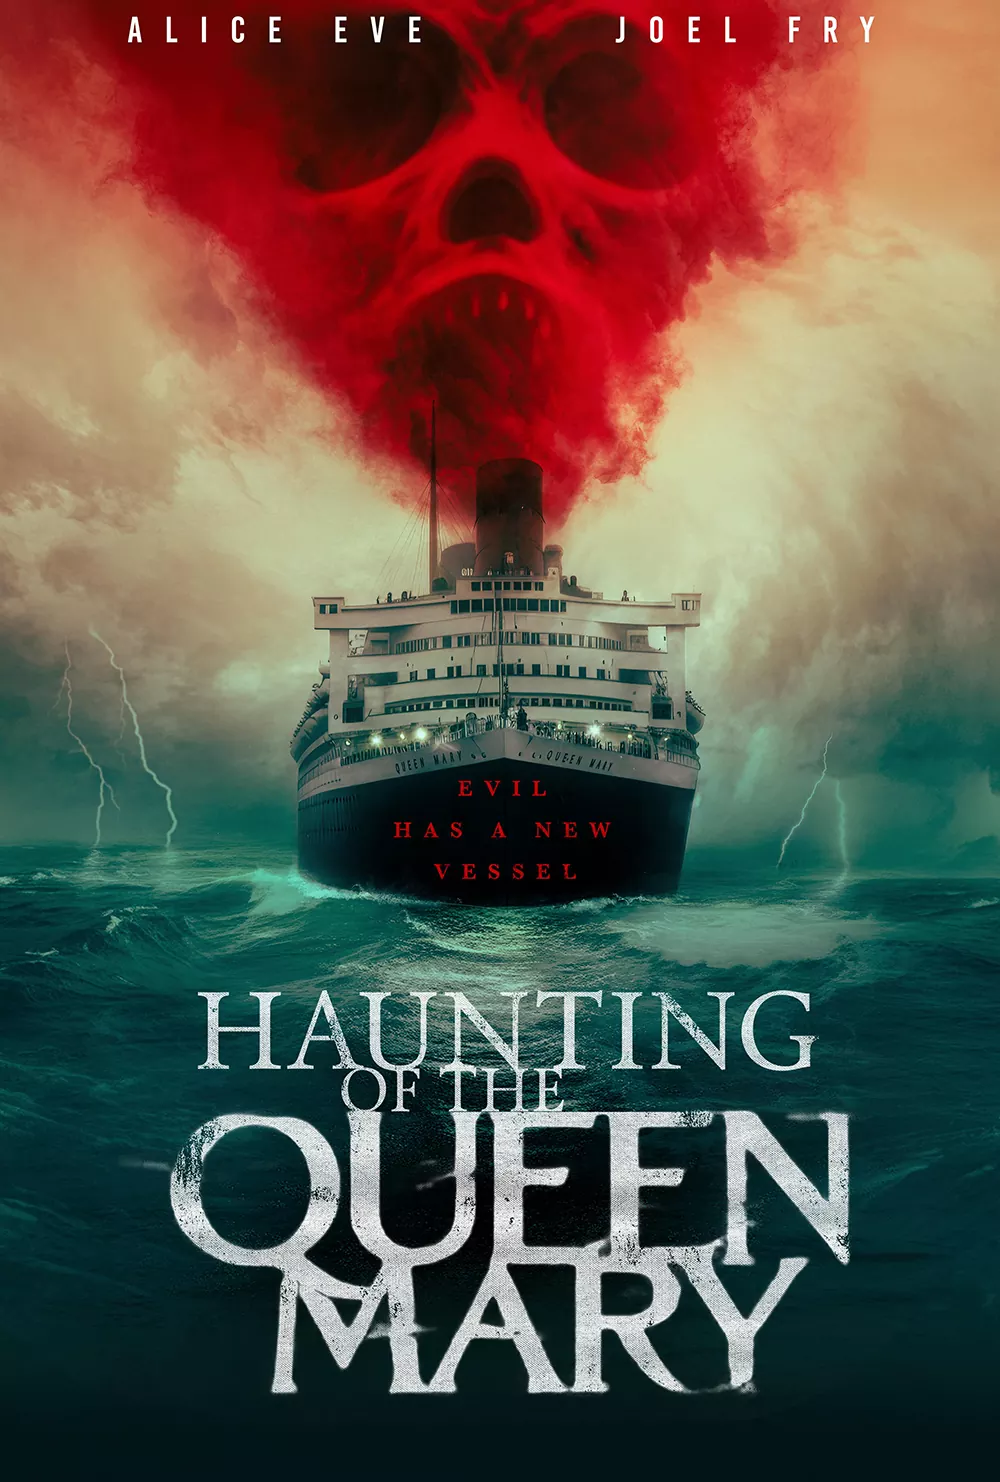 Trailer Από Το Θρίλερ Τρόμου "Haunting of the Queen Mary"